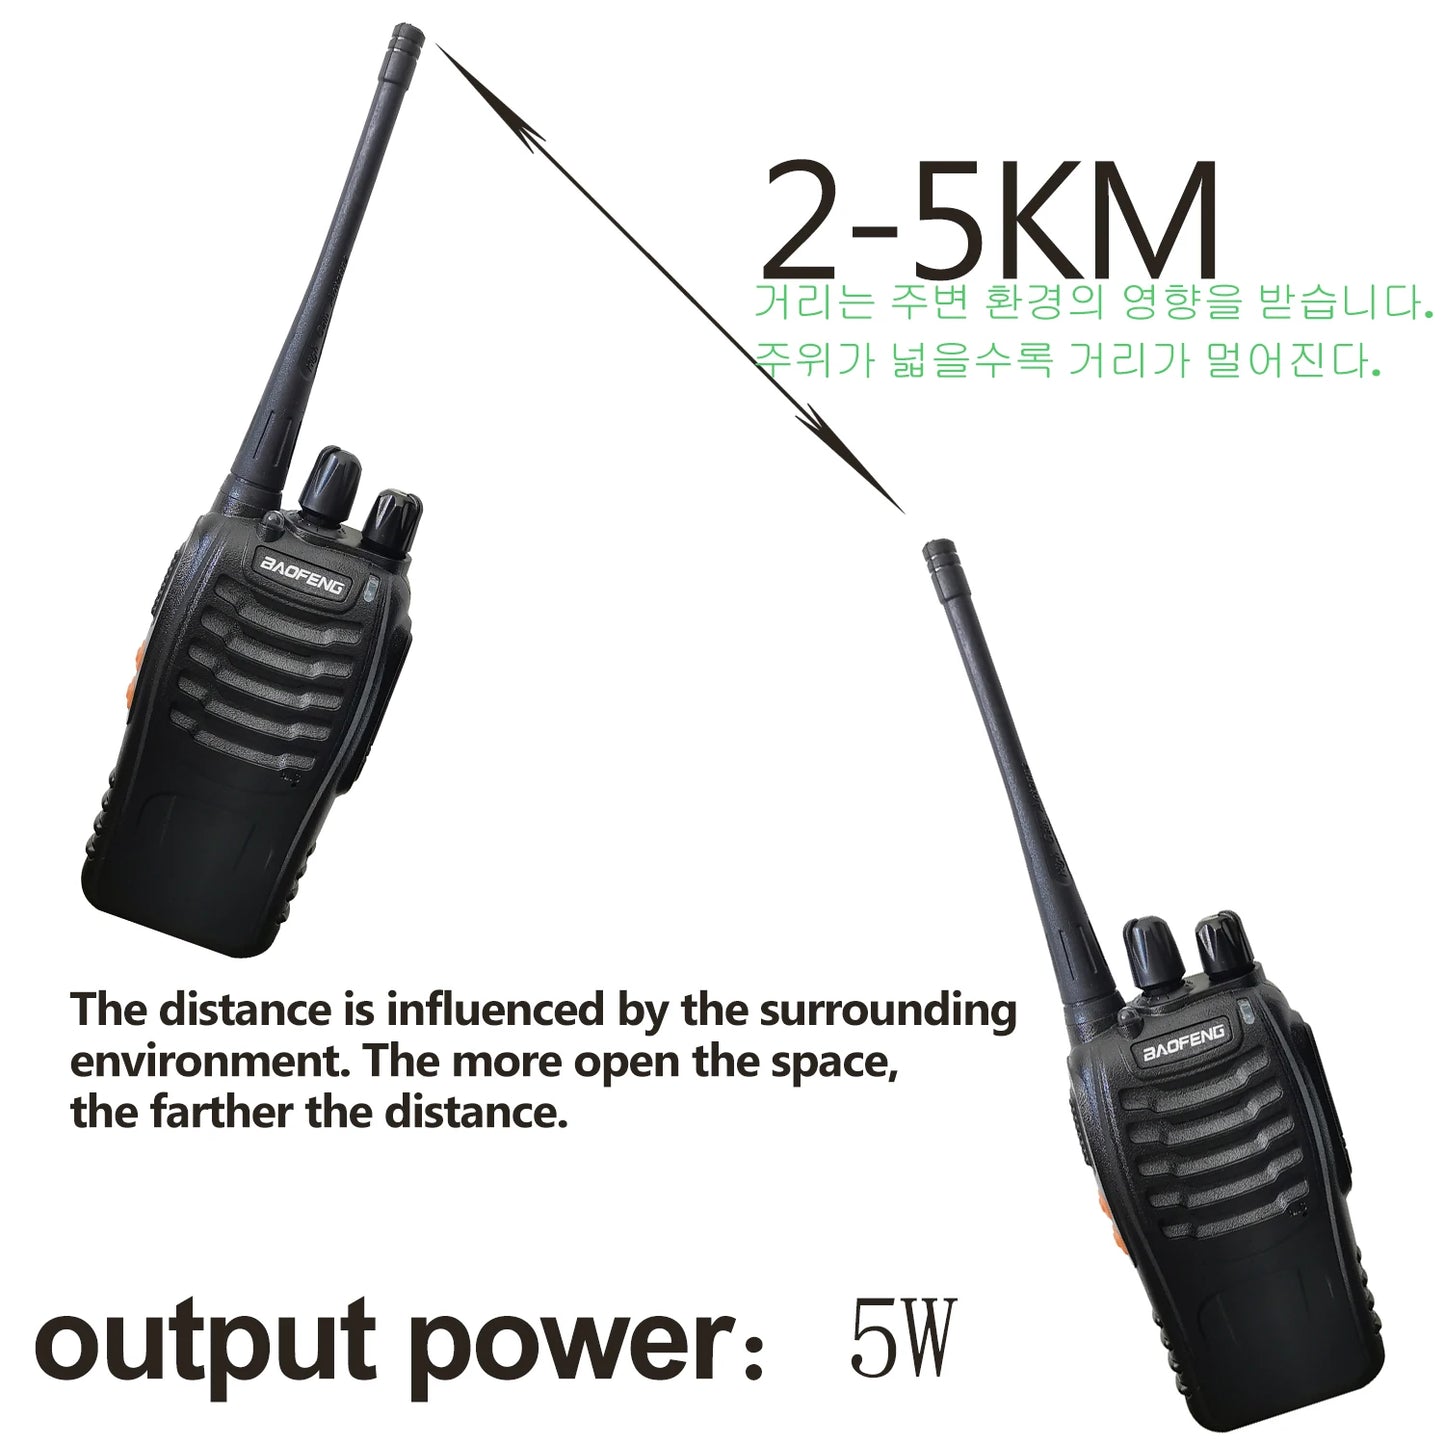 6pcs or 3pairs BaoFeng Walkie-Talkie 888S UHF 400-470MHz Channel Portable Two Way Radio 16Channels 5W long distance walkie-talki